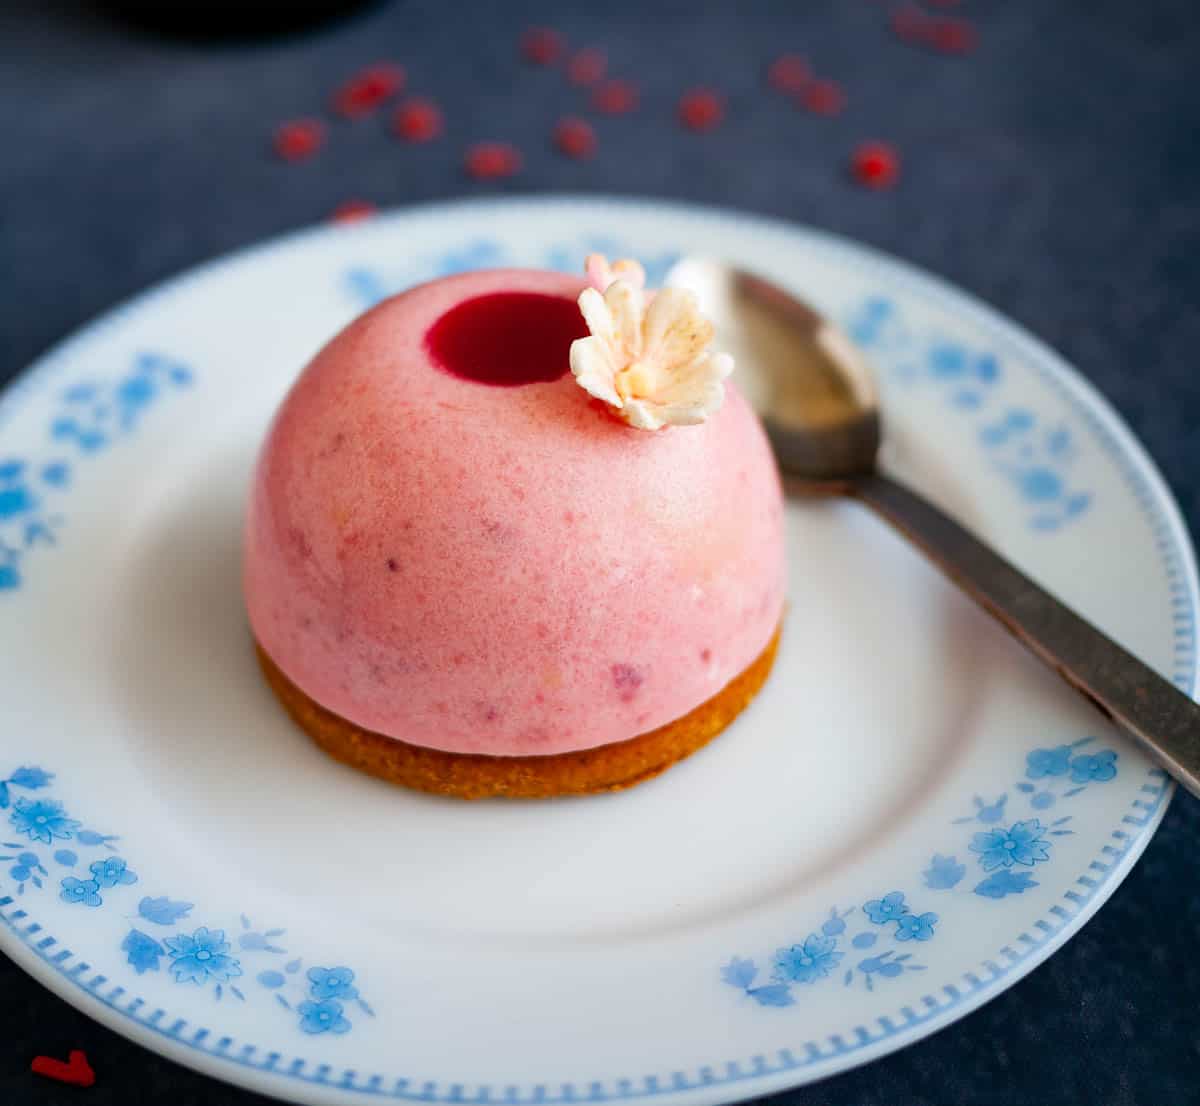 Strawberry entremets on a plate